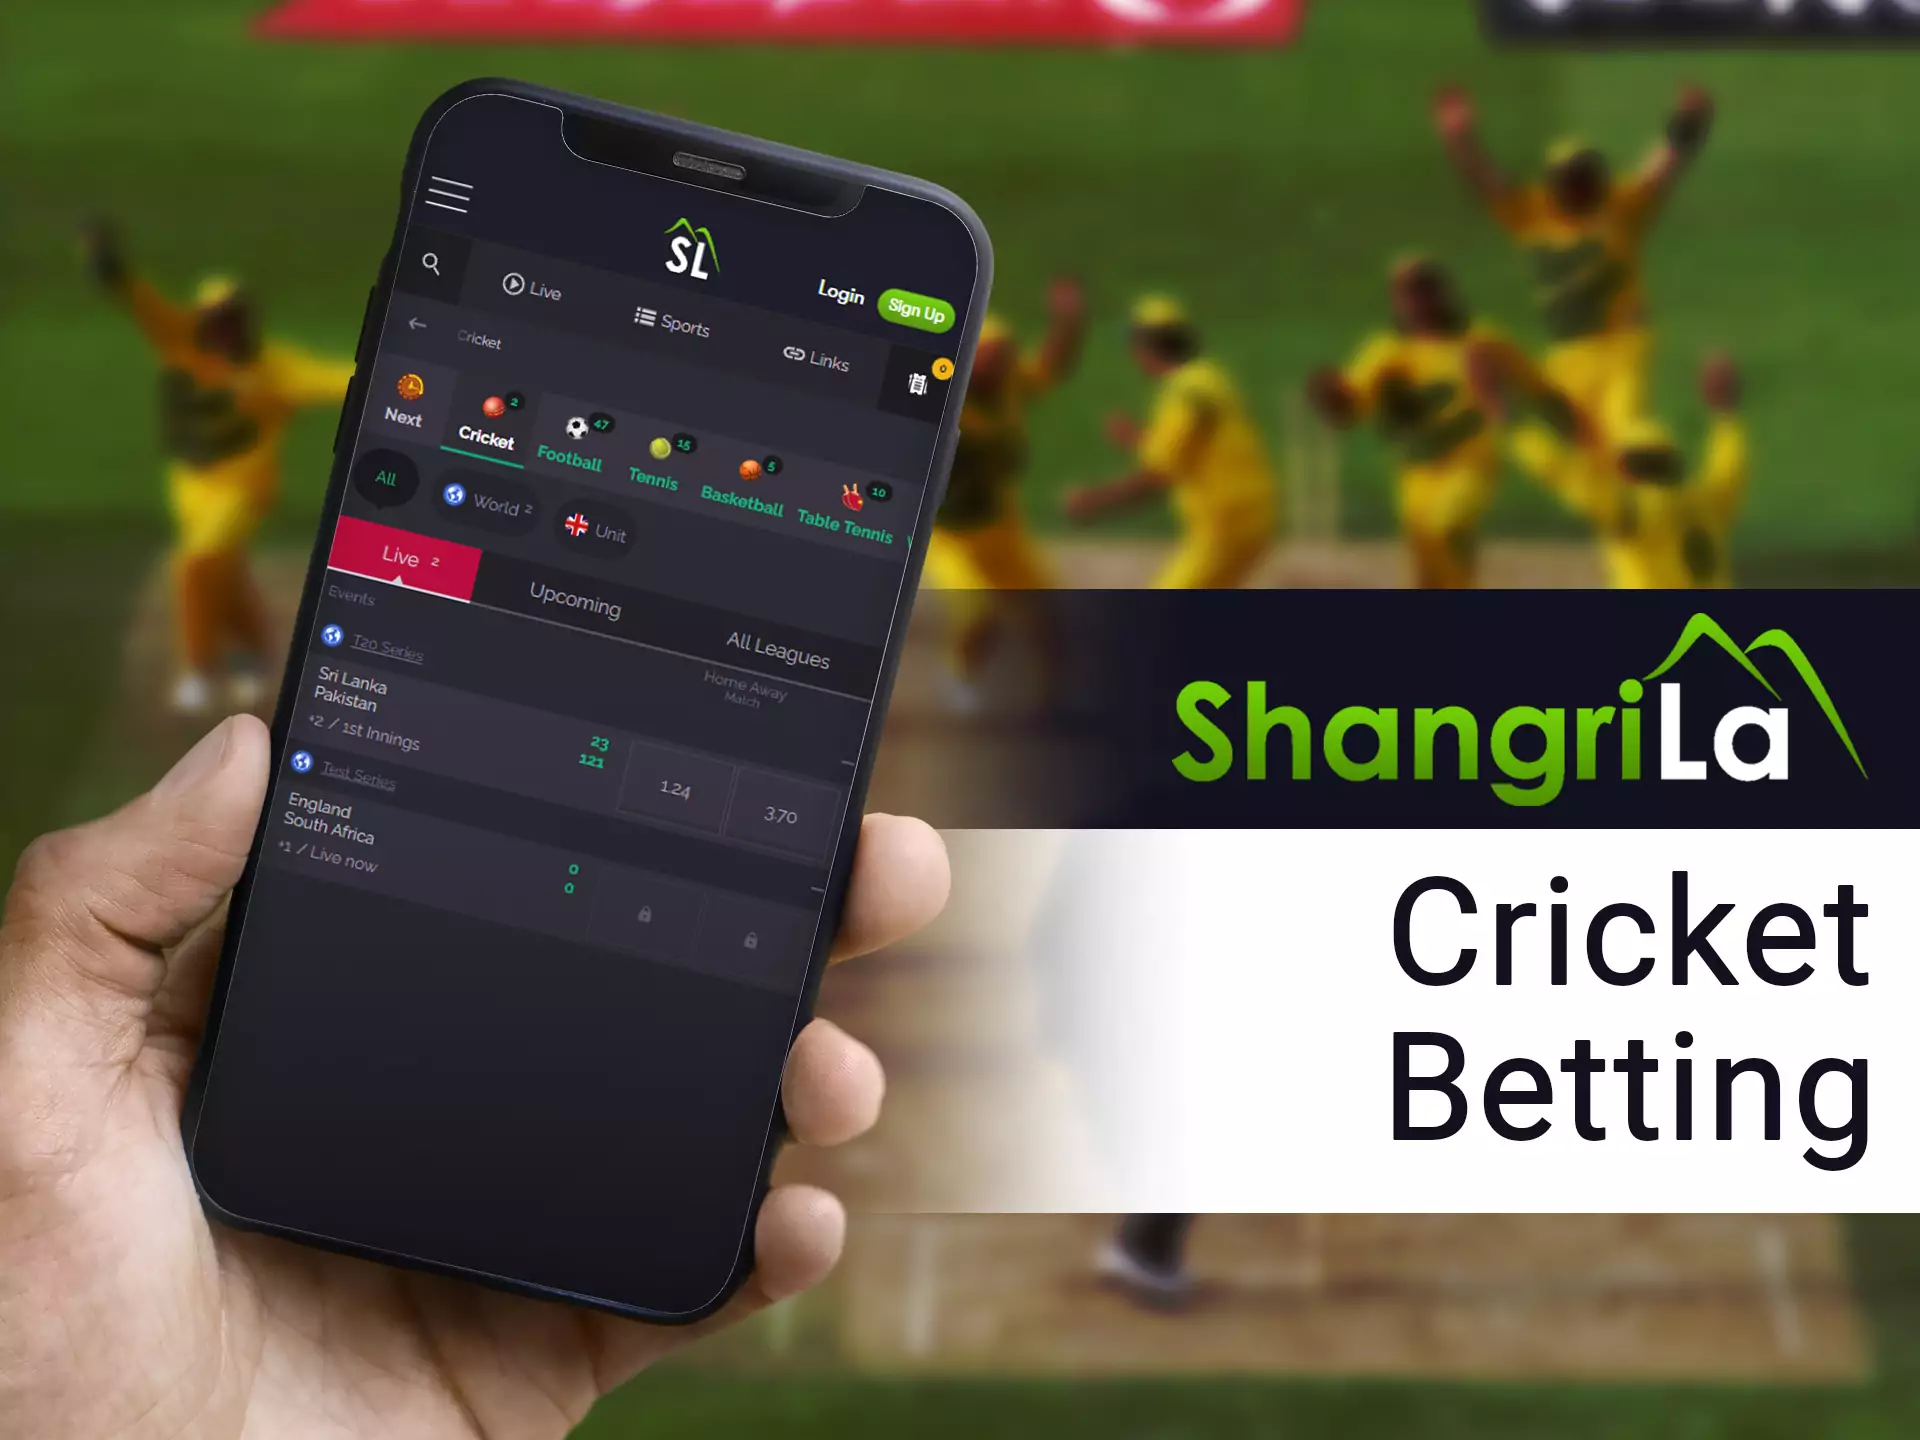 Watch and bet on best cricket matches in Shangri La app.